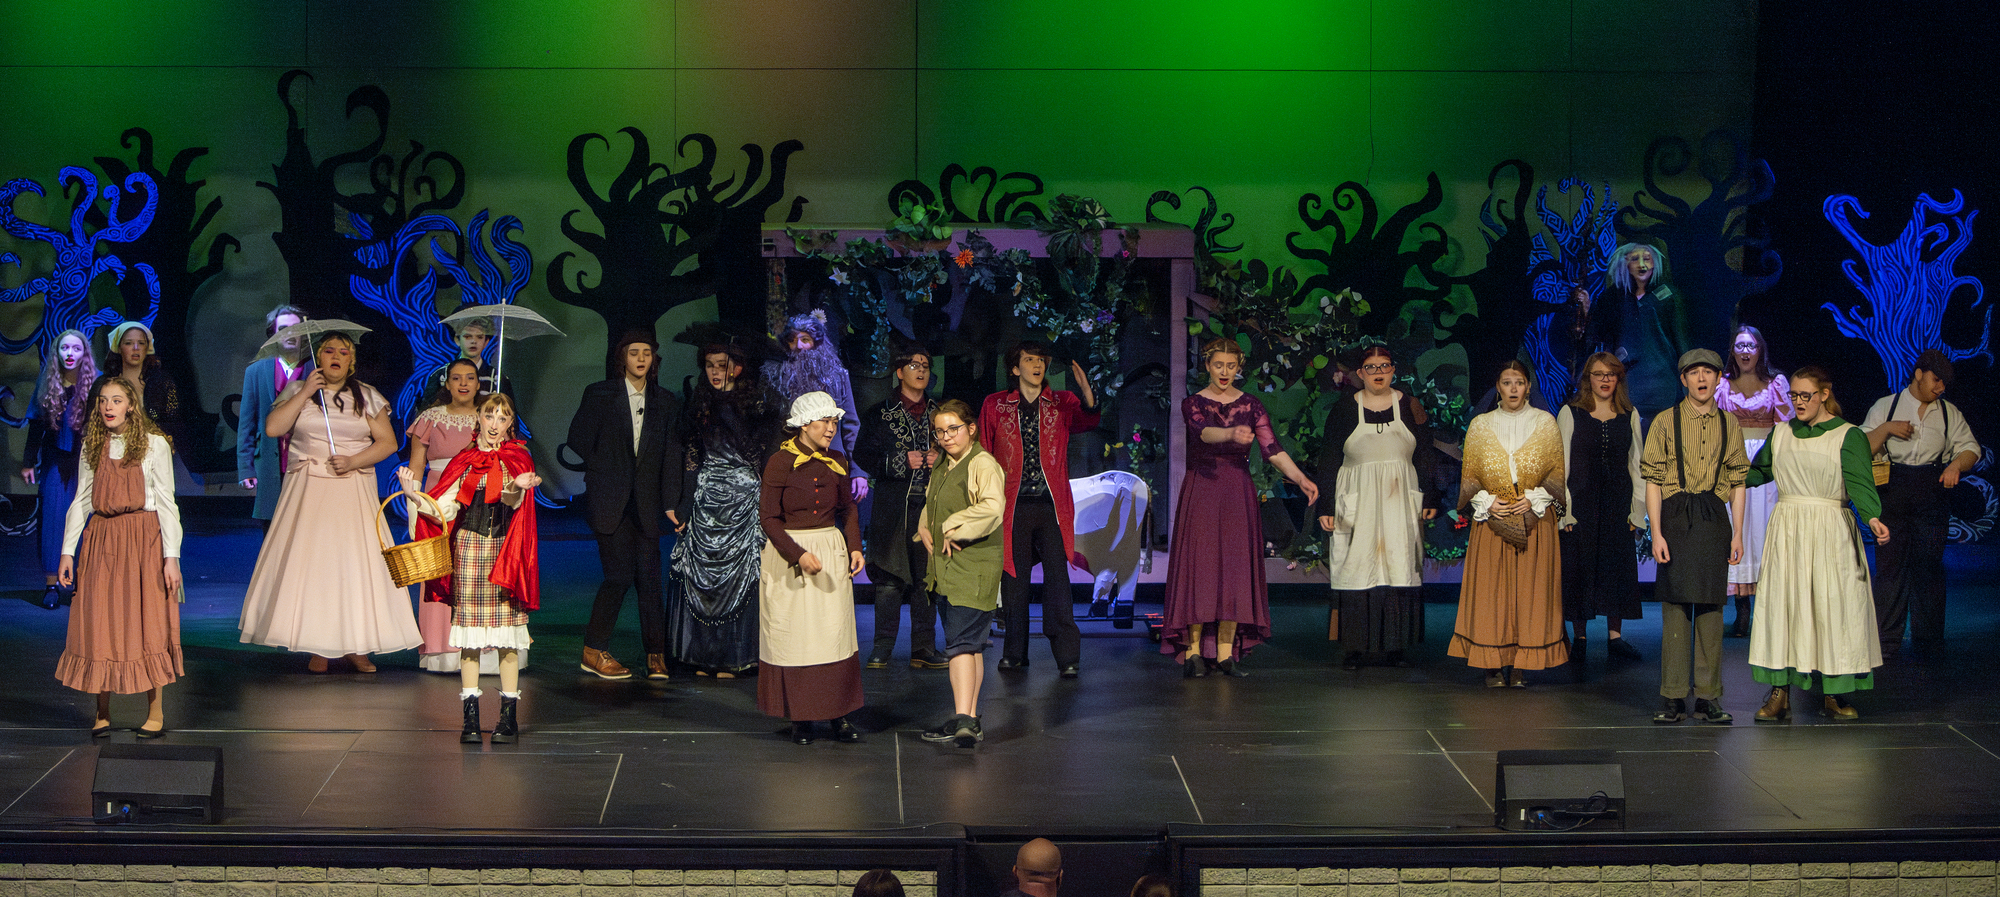 Play "Into the Woods" Cast members during a scene